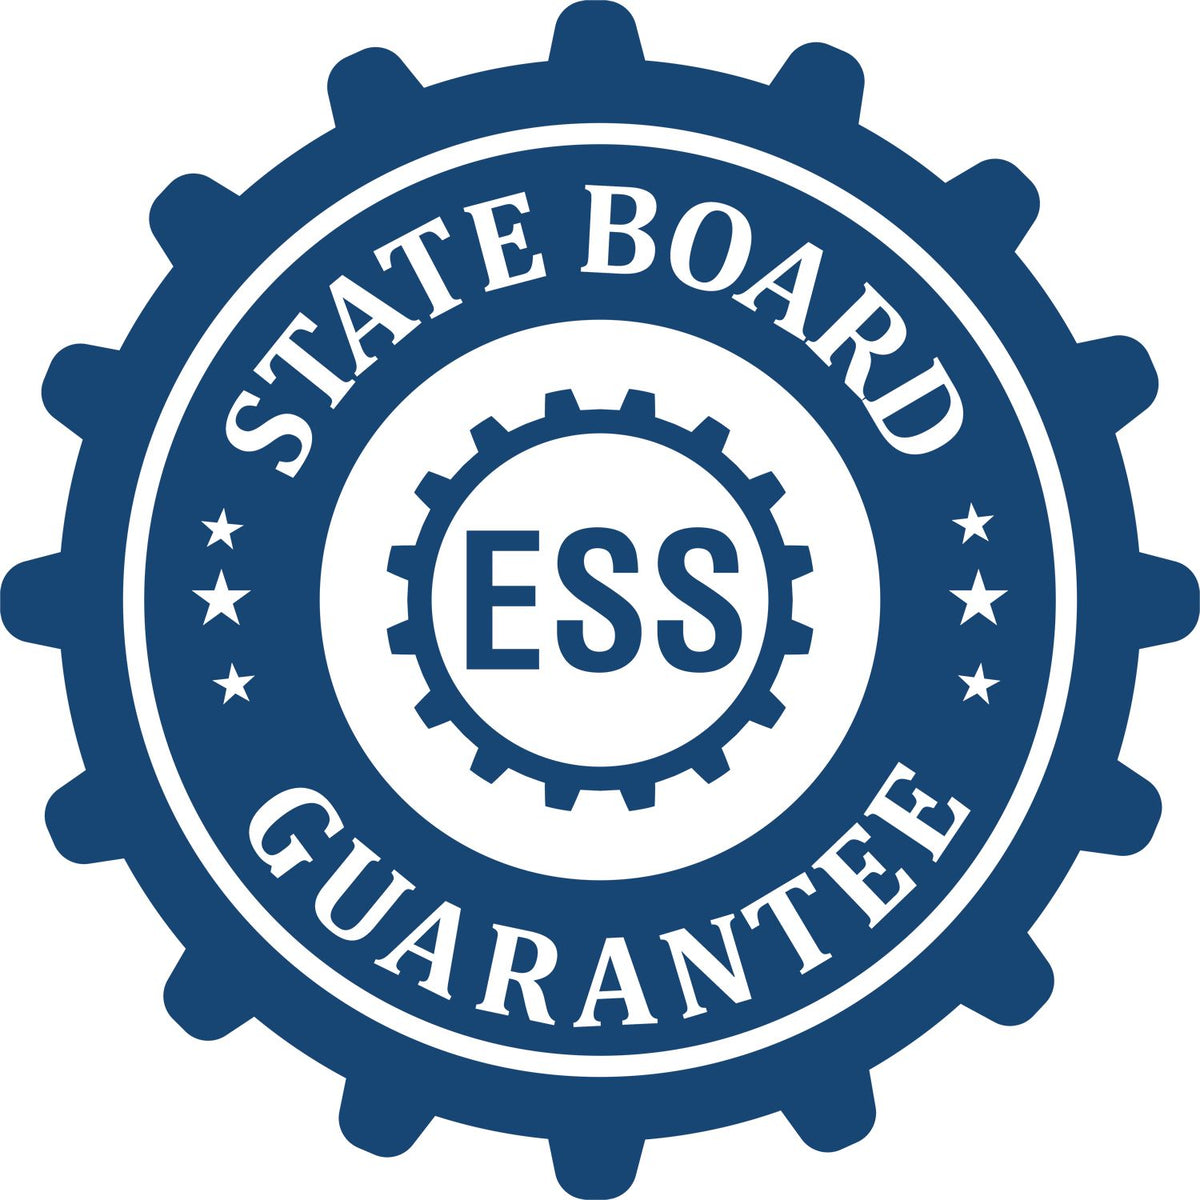 An emblem in a gear shape illustrating a state board guarantee for the State of Texas Extended Long Reach Engineer Seal product.